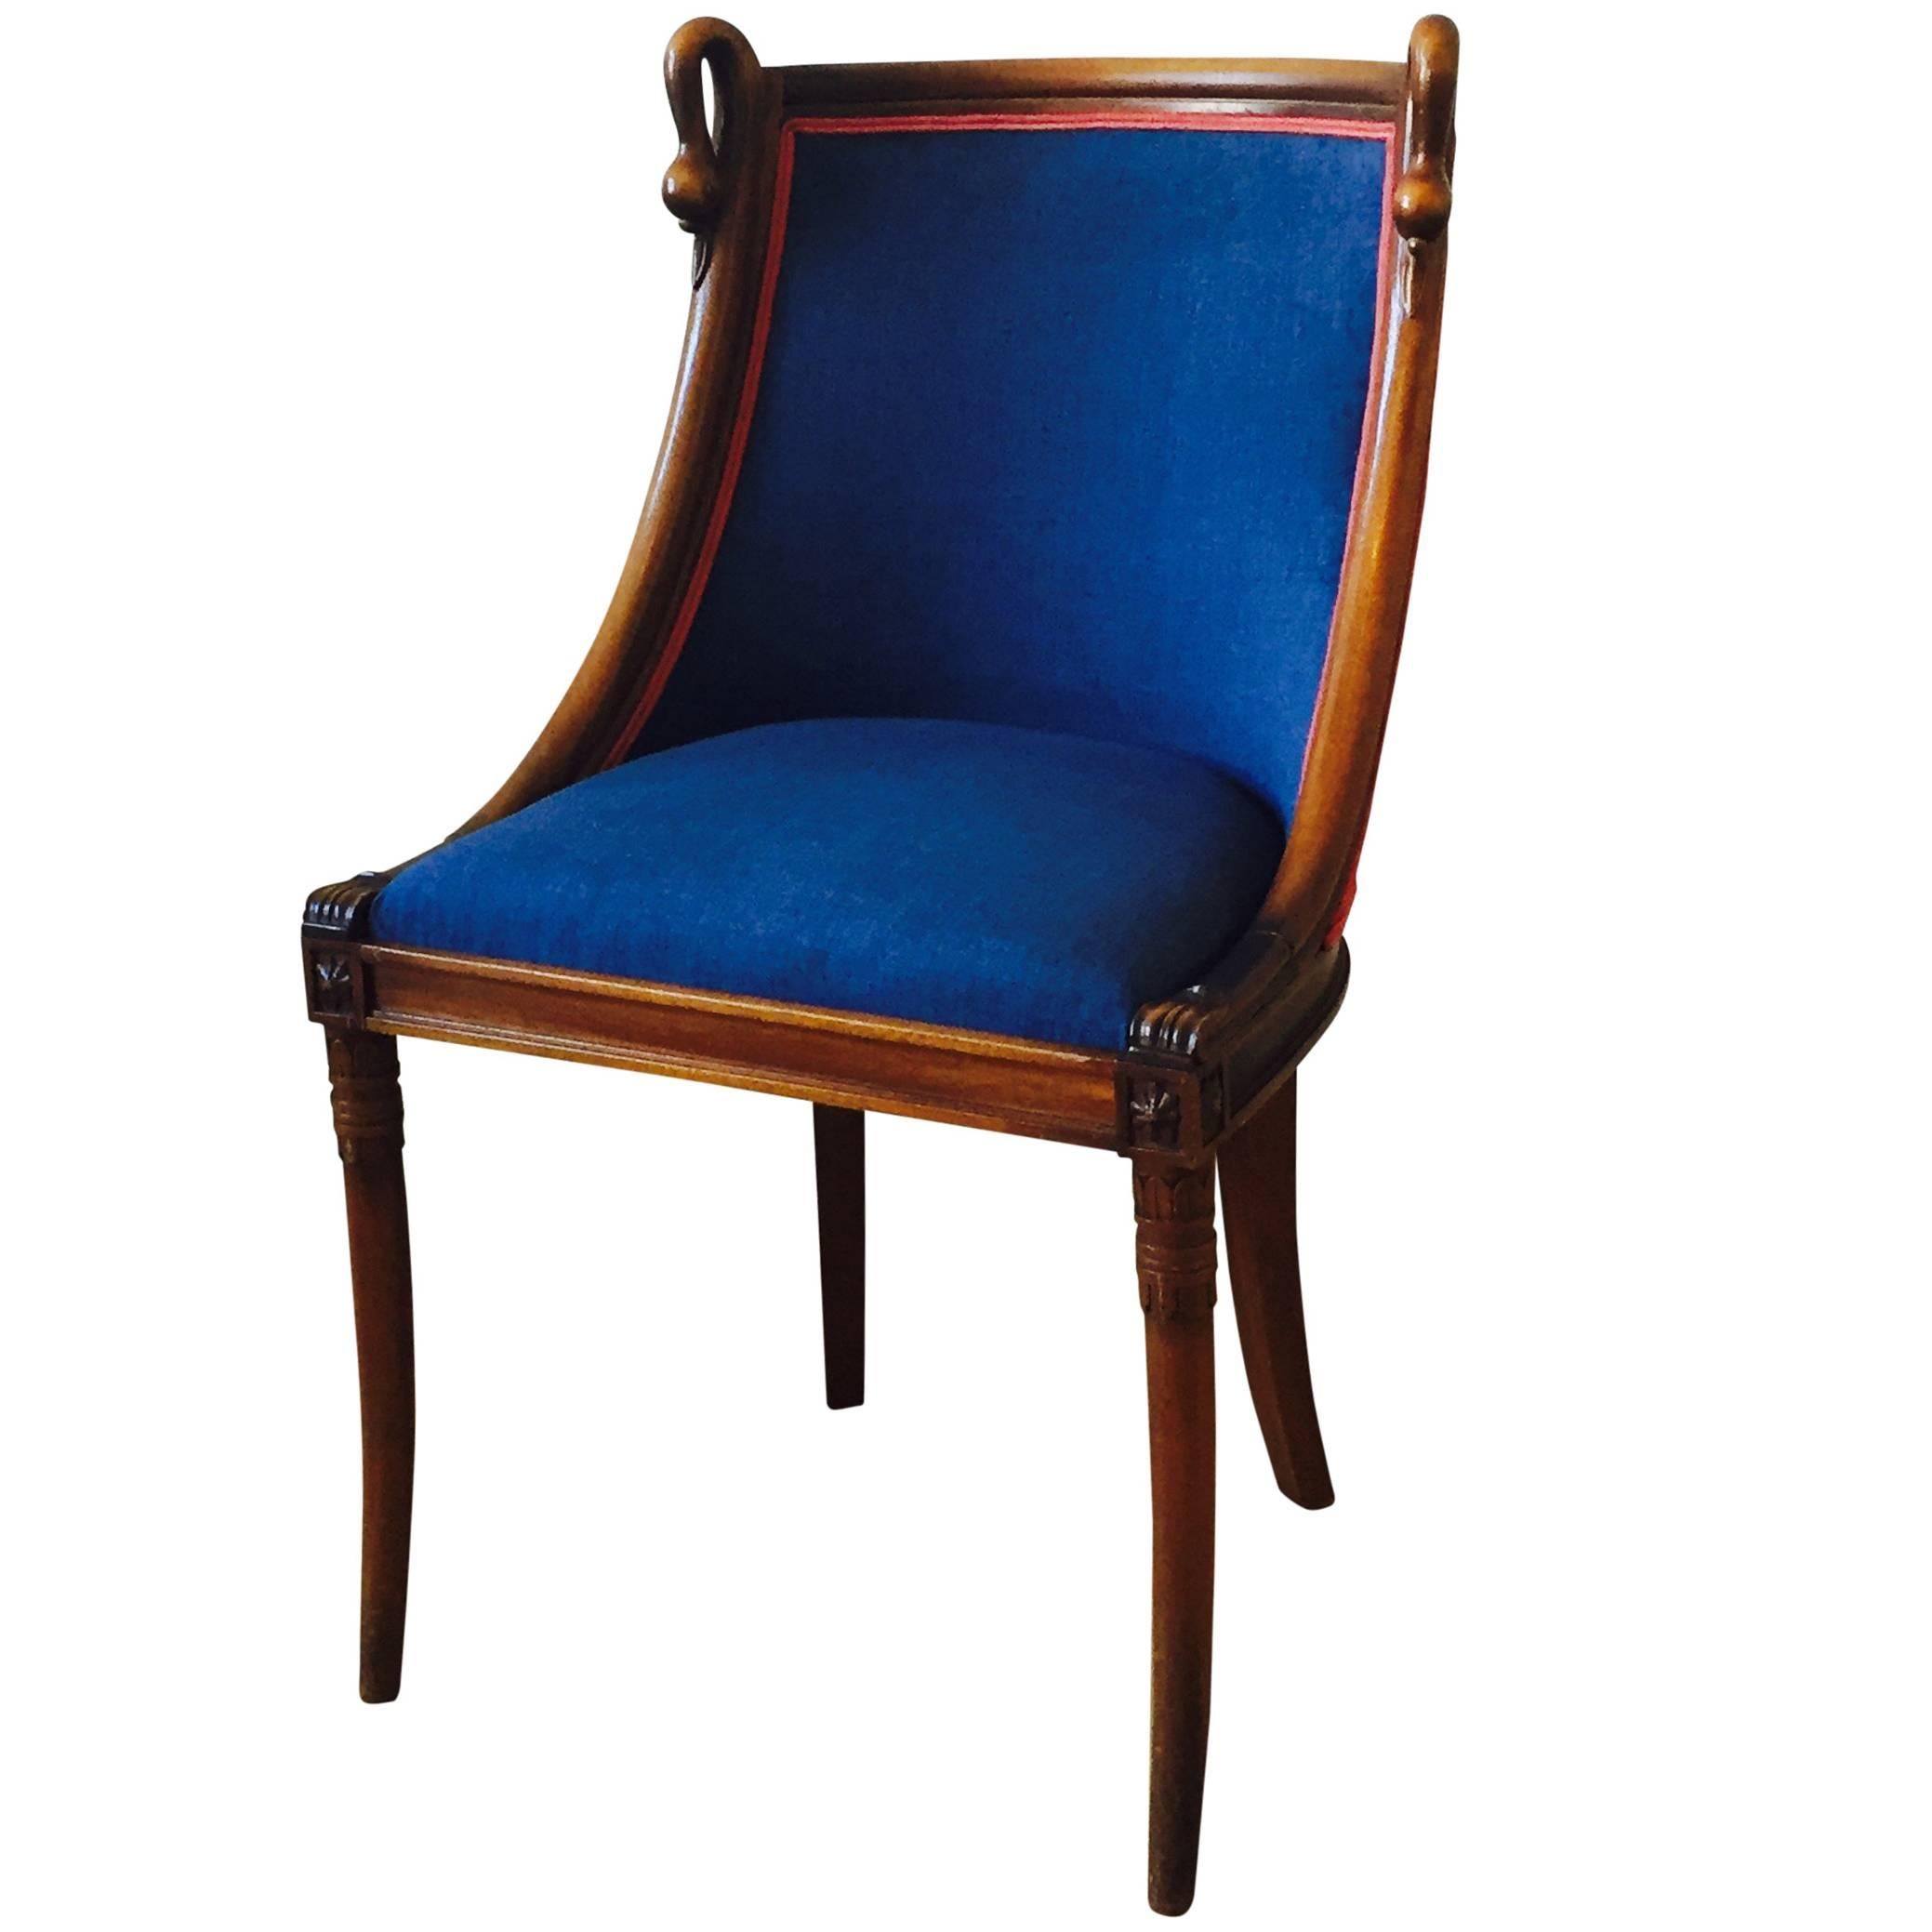 Momiq chair 'Lovebirds' is a small fruitwood chair with curved swan necks. The chair is from the 20th century and Empire style. Chair lovebirds has been adjusted to Momiq design and has been upholstered with a blue fabric from Houles at the front.